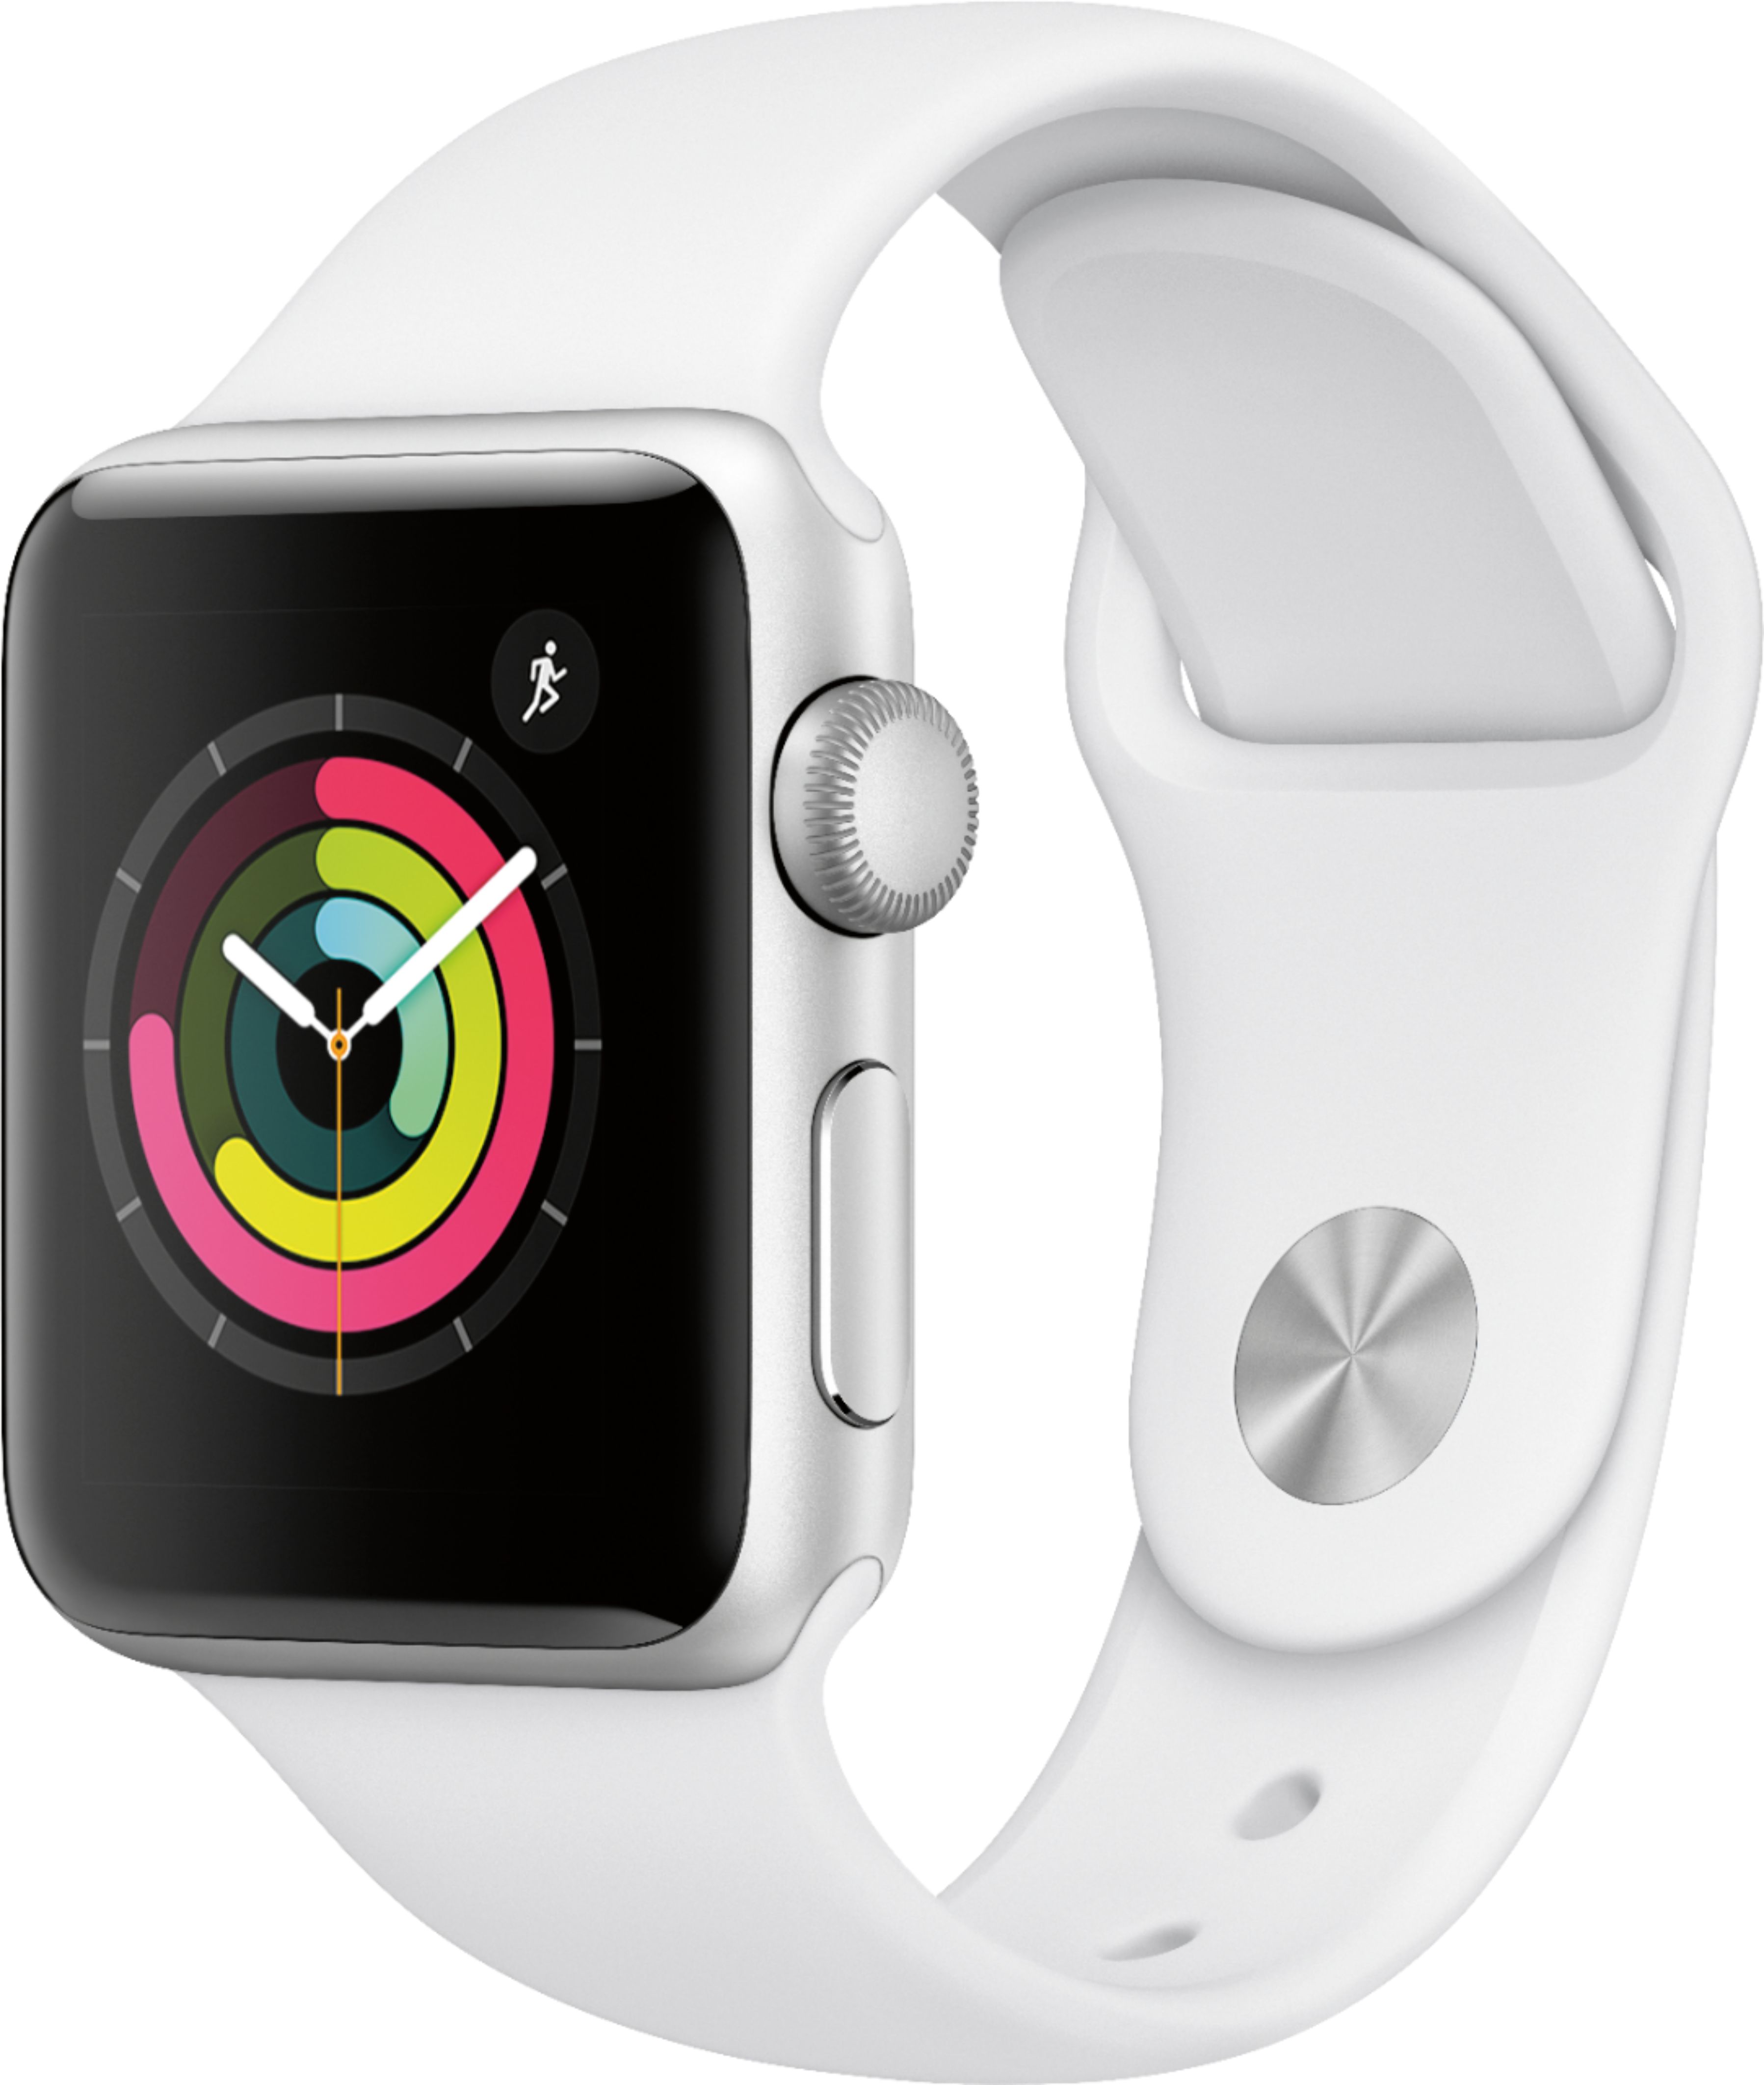 Apple Watch Series 3 (GPS) 38mm Silver Aluminum Case with...